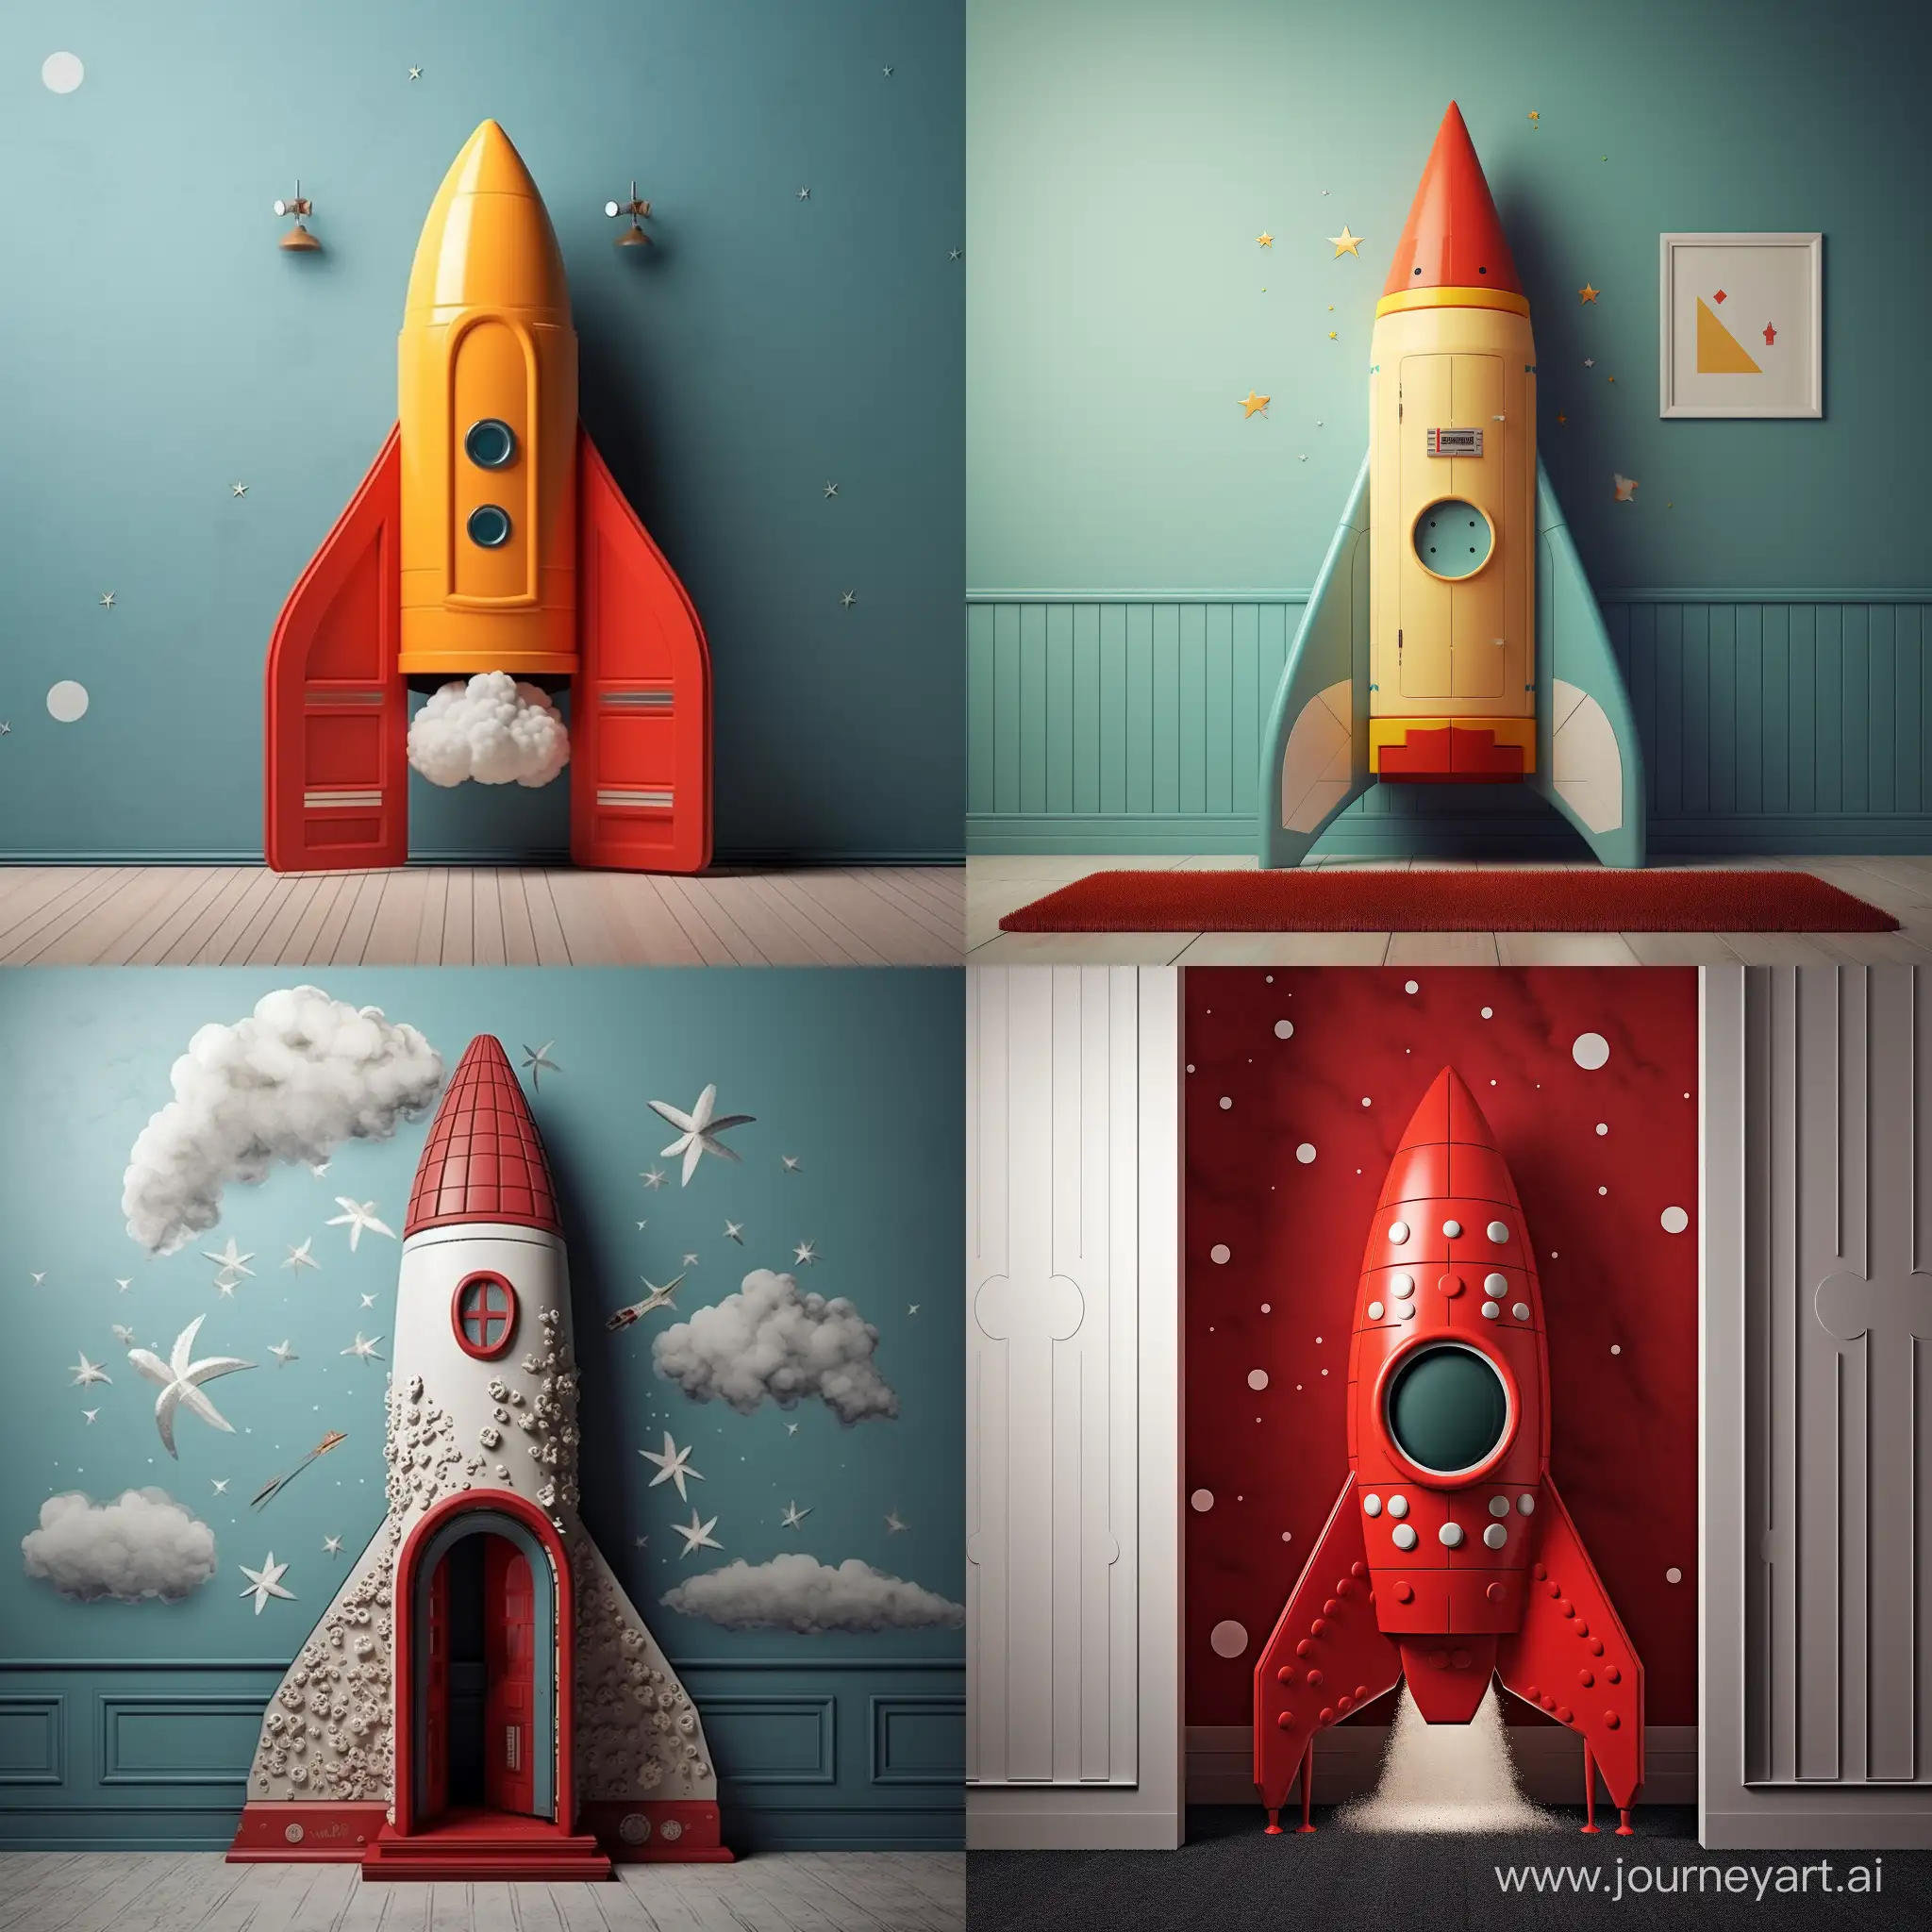 RocketShaped-Door-Whimsical-Entryway-for-Creative-Spaces